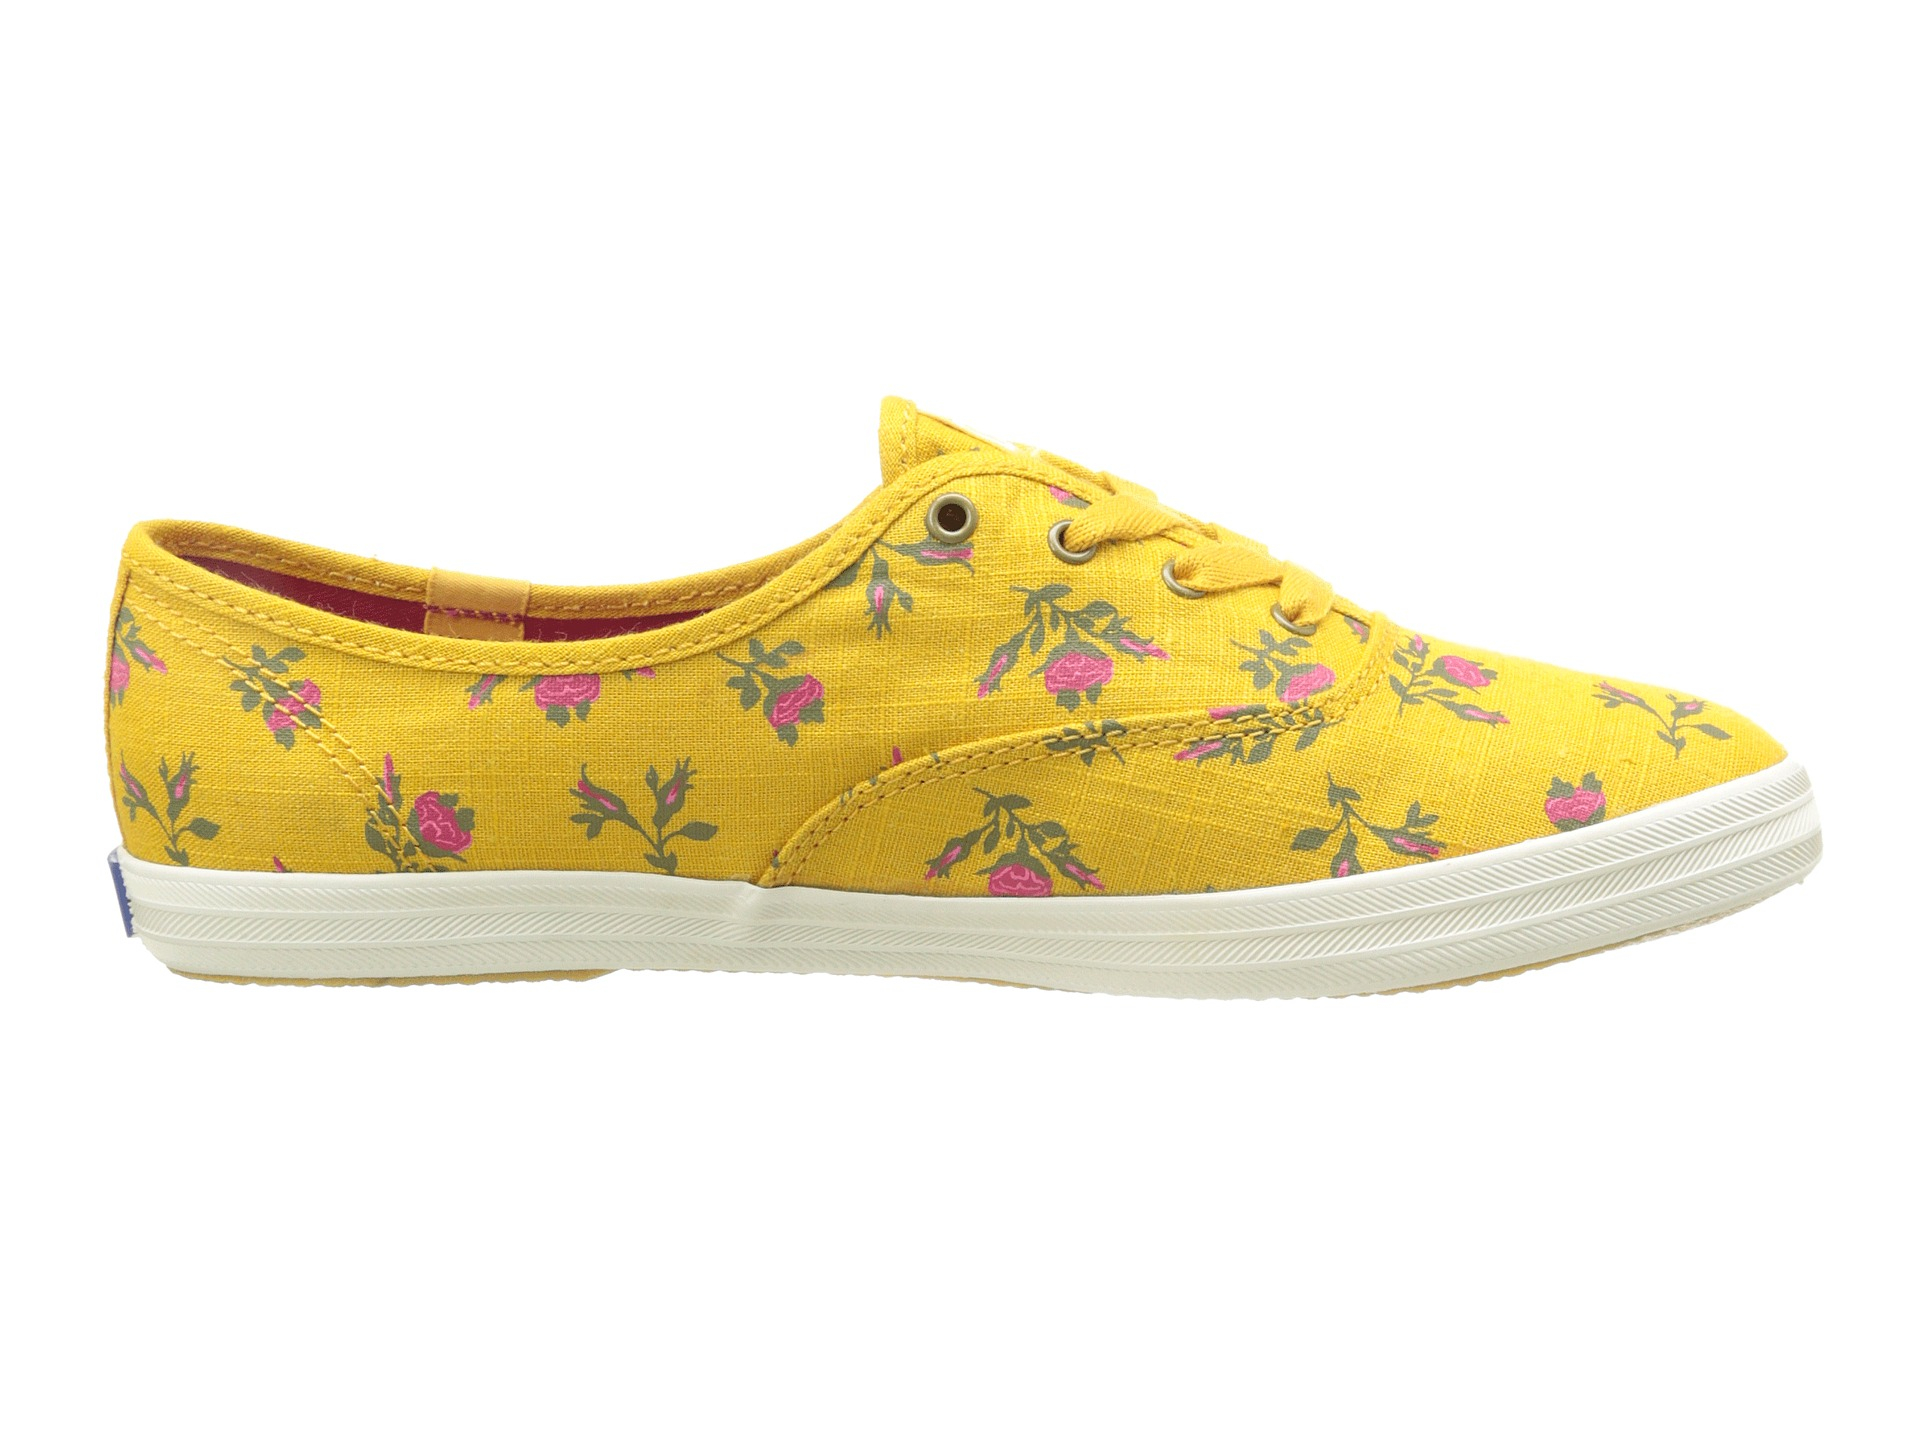 Keds Champion Floral in Mustard Yellow (Yellow) - Lyst